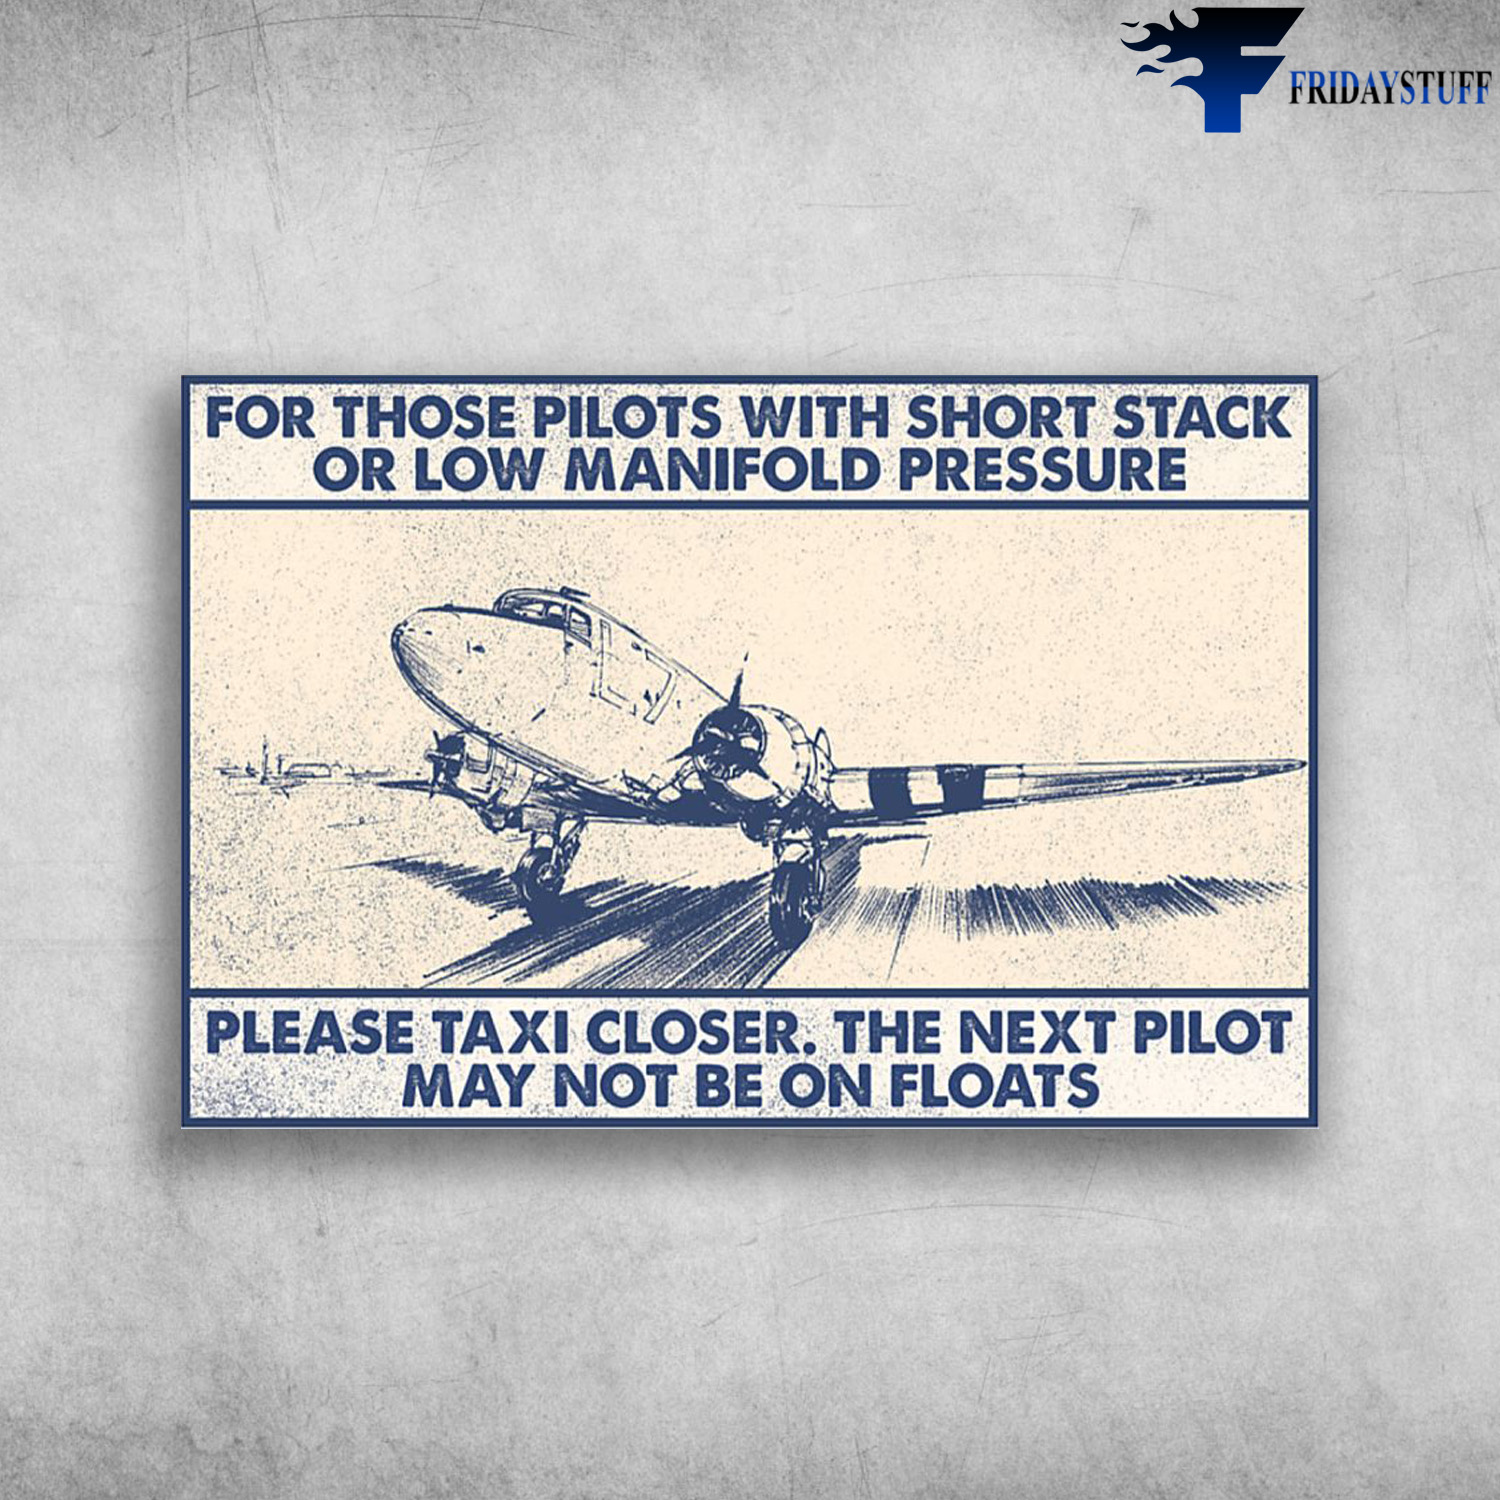 The Airplane - For Those Pilots With Short Stack Or Low Manifold Pressure, Please Taxi Closer, The Next Pilot May Not Be On Floats